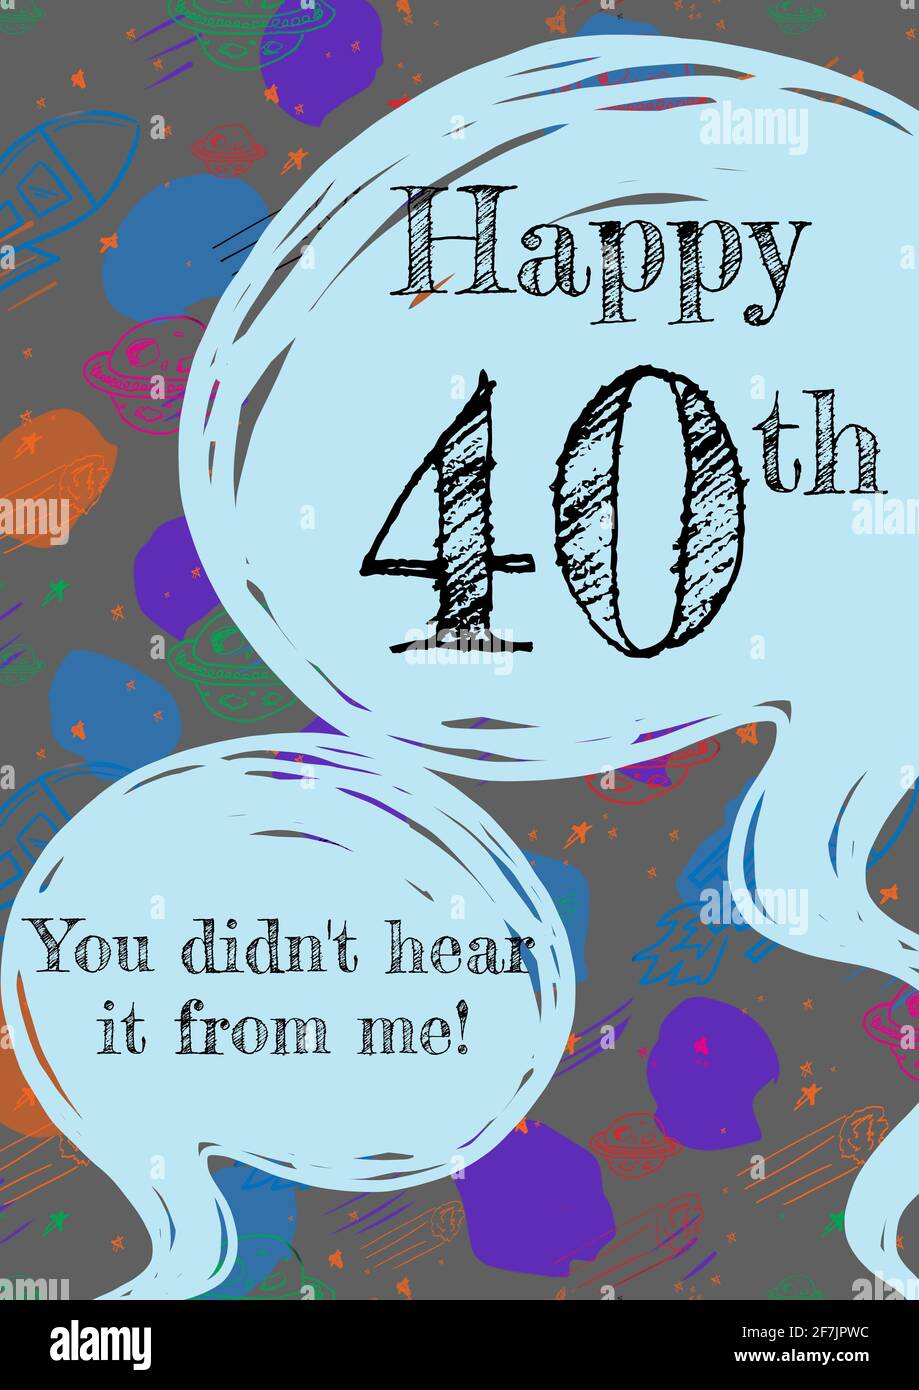 Happy 40th, you didn't hear it from me written in speech bubbles on invite with painterly background Stock Photo